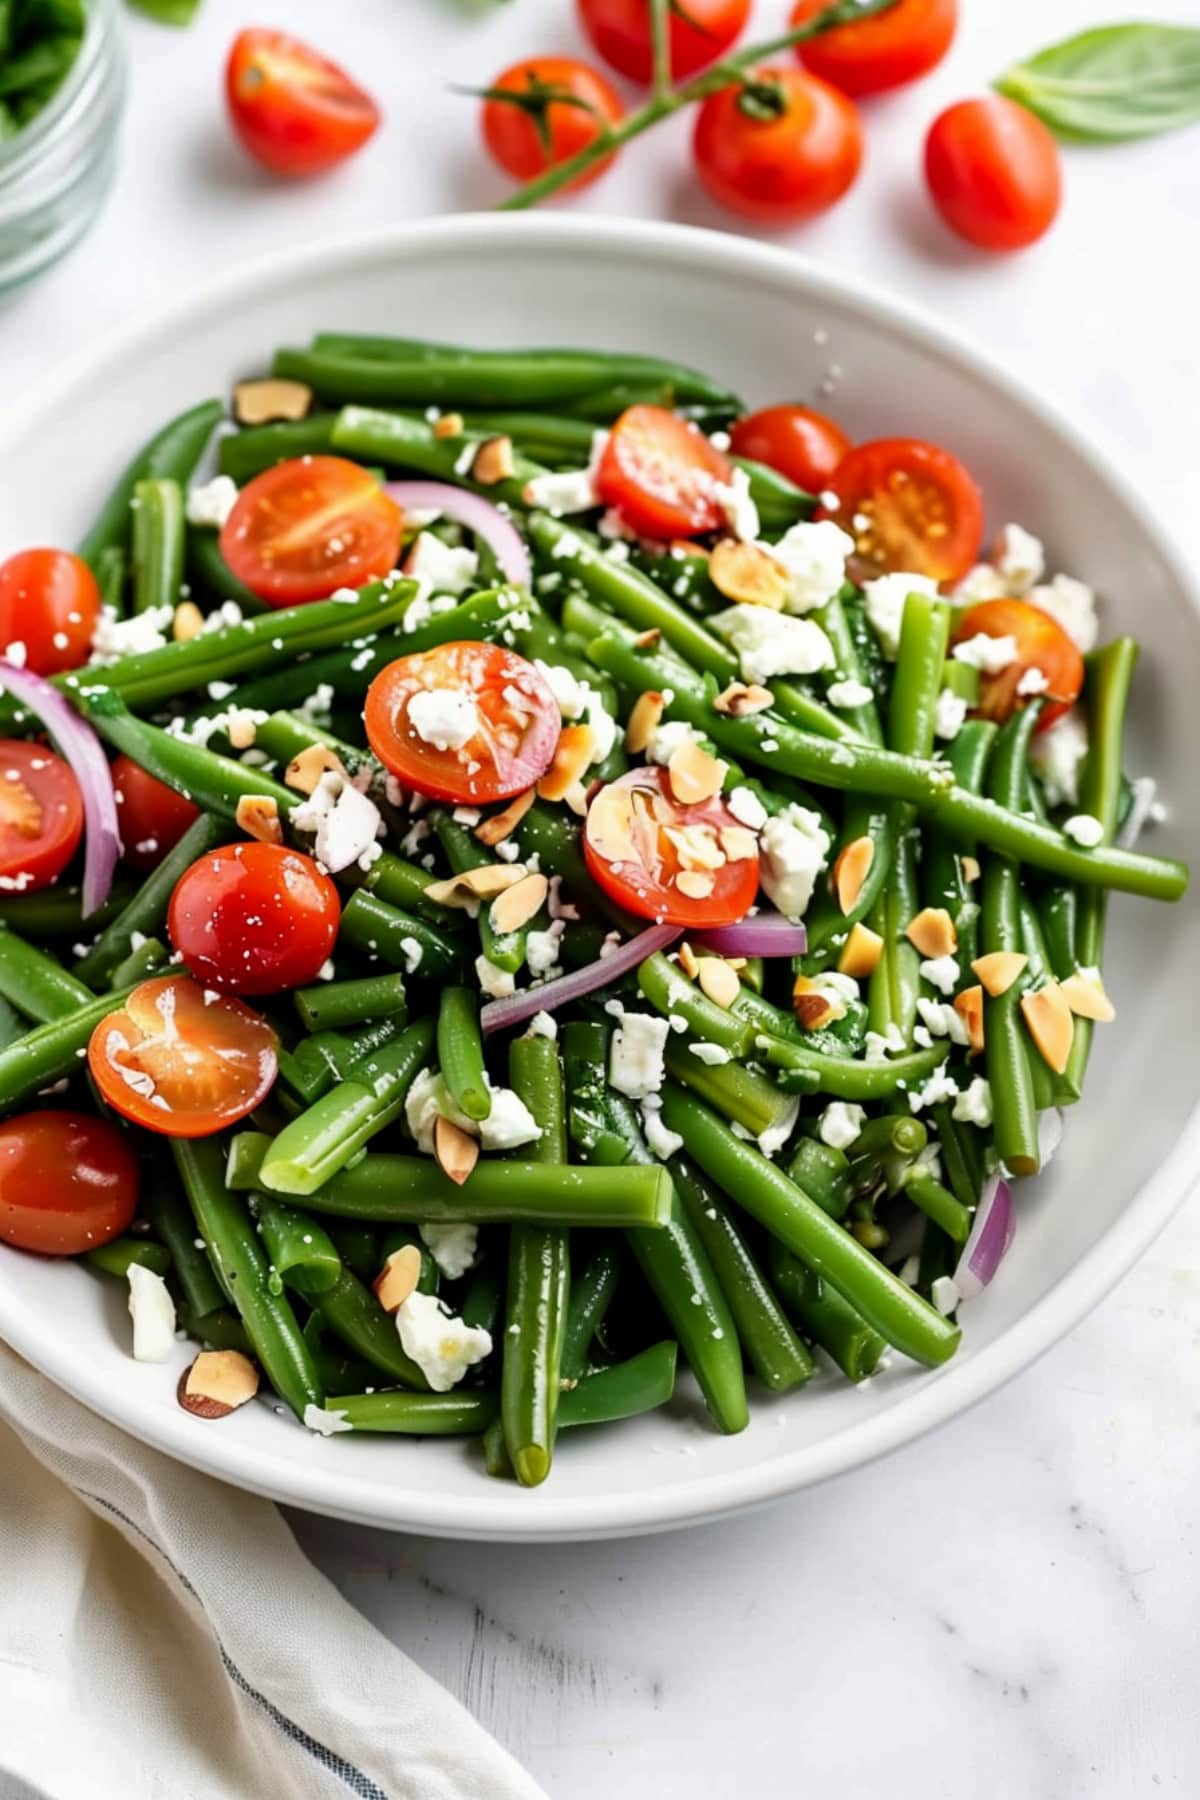 Crunchy green bean salad, topped with toasted almonds and crumbled feta.